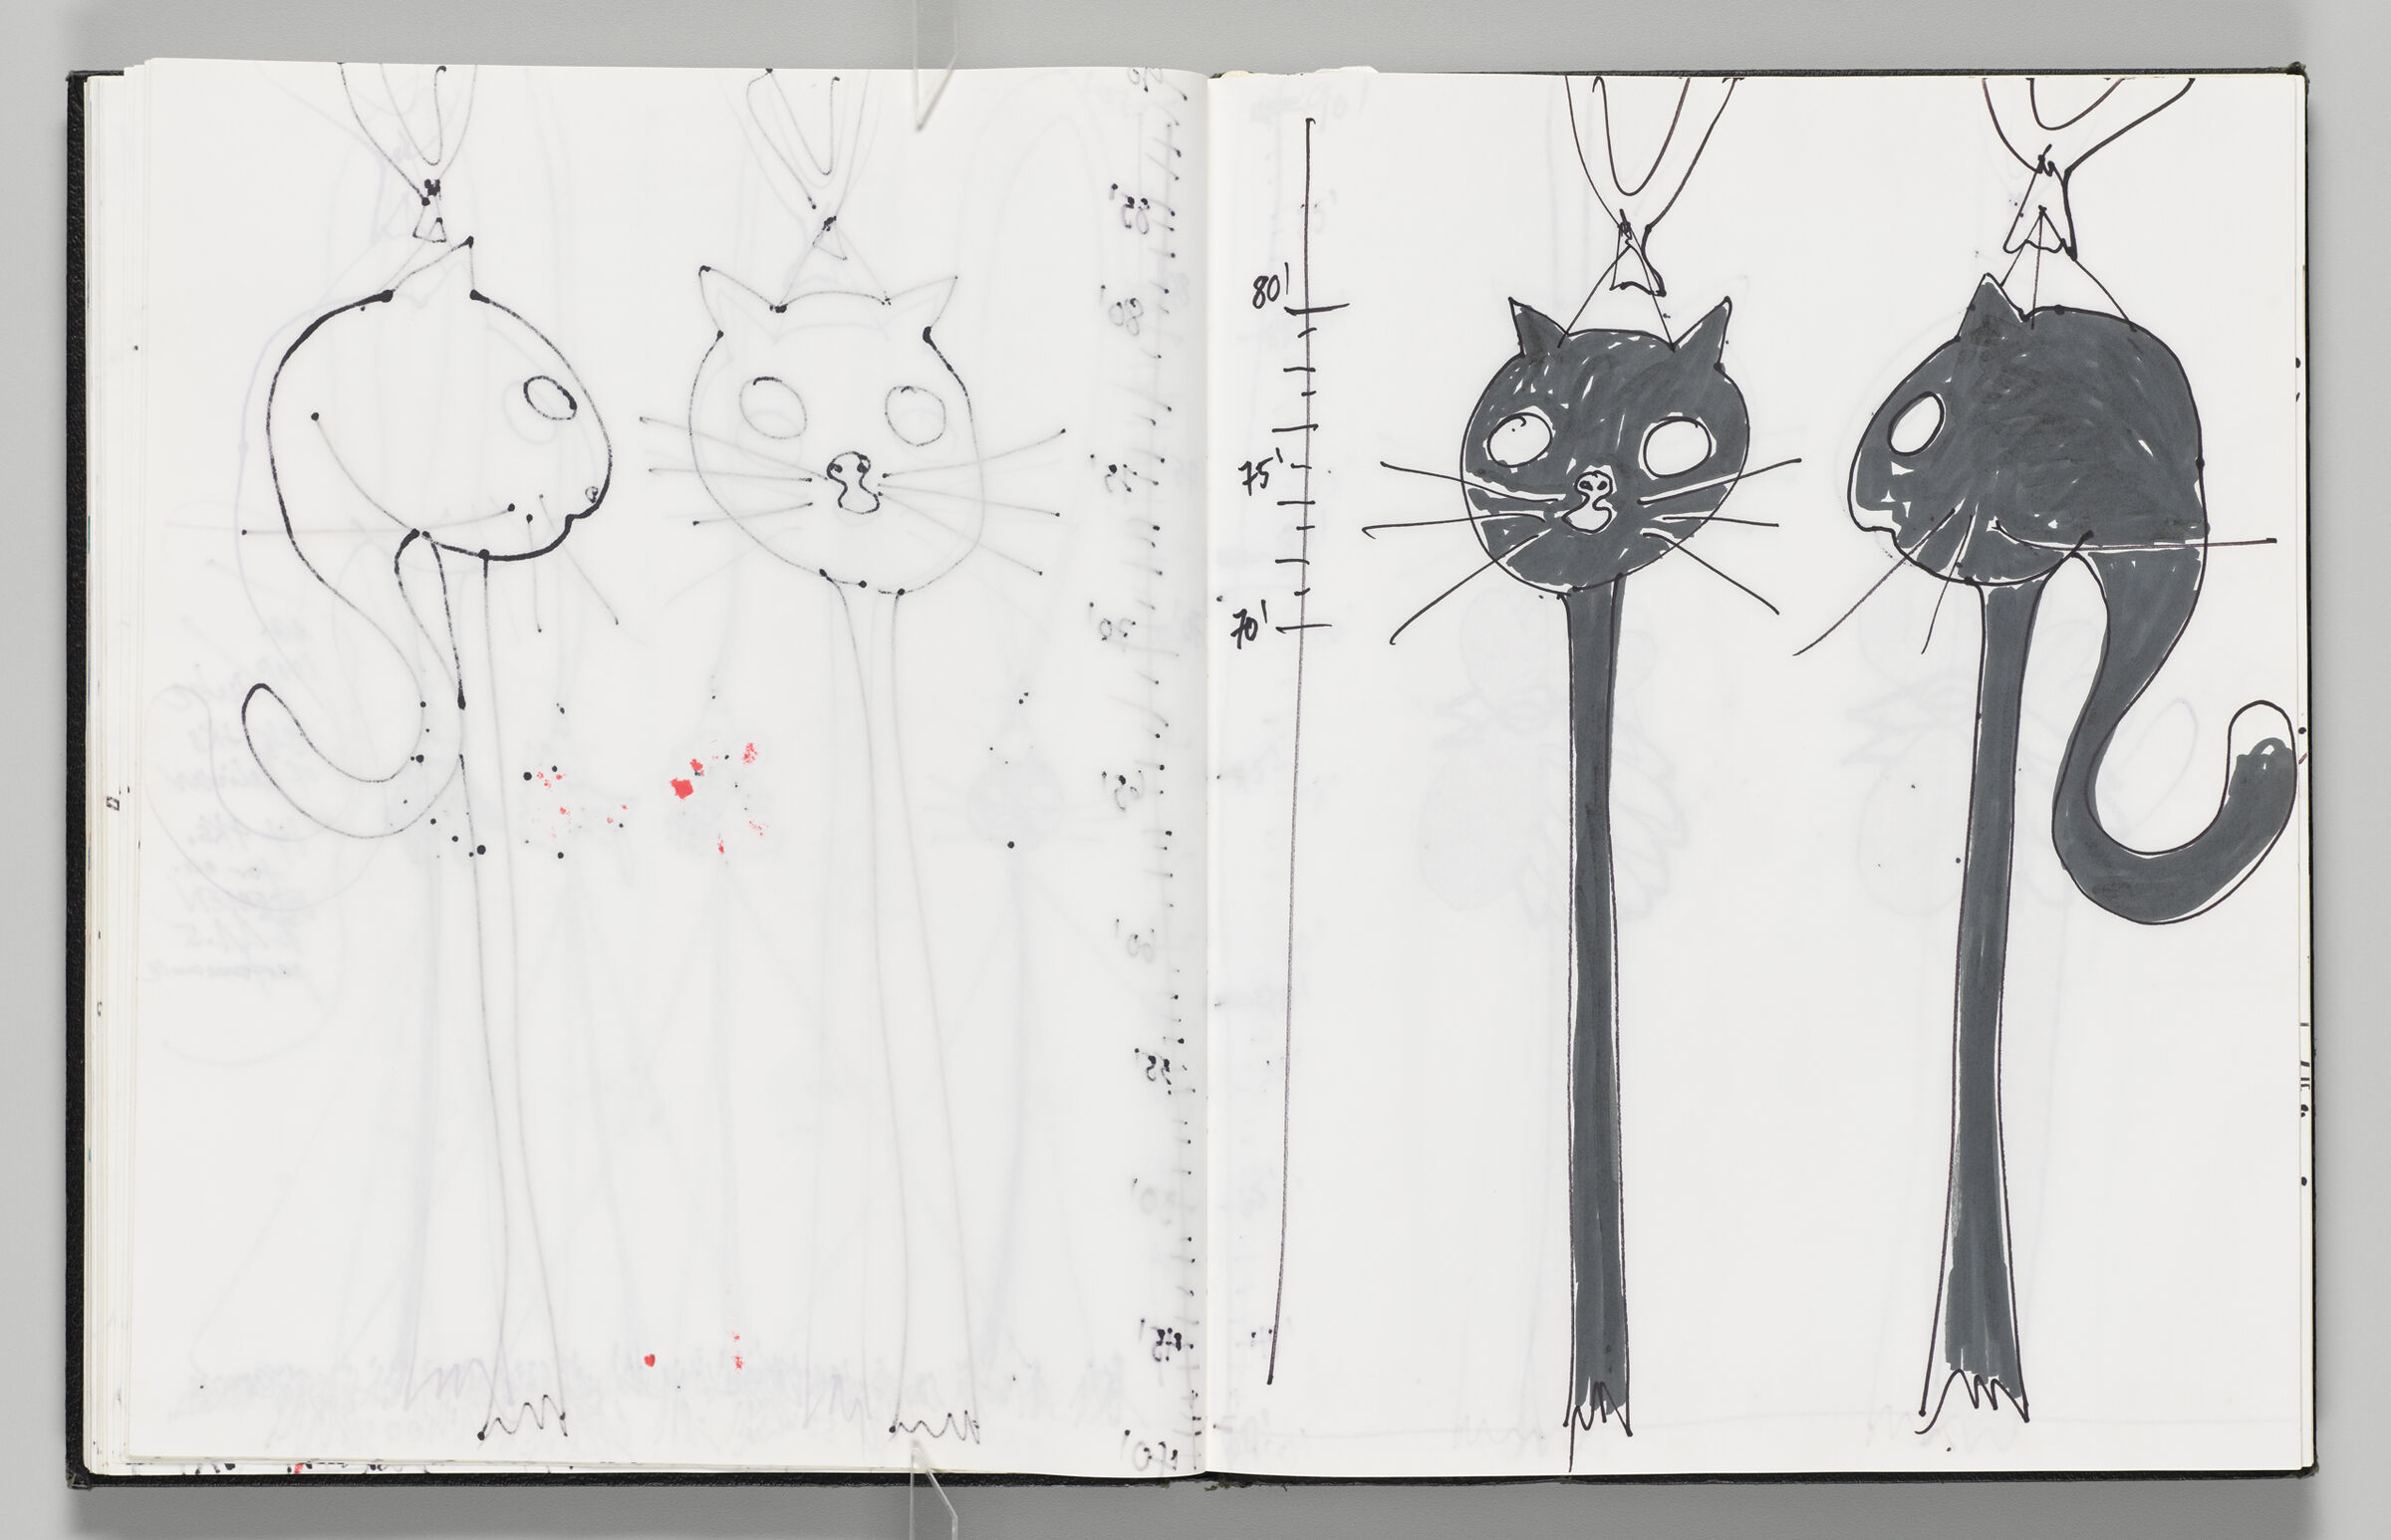 Untitled (Bleed-Through Of Previous Page, Left Page); Untitled (Scale Of Cat Inflatable, Right Page)